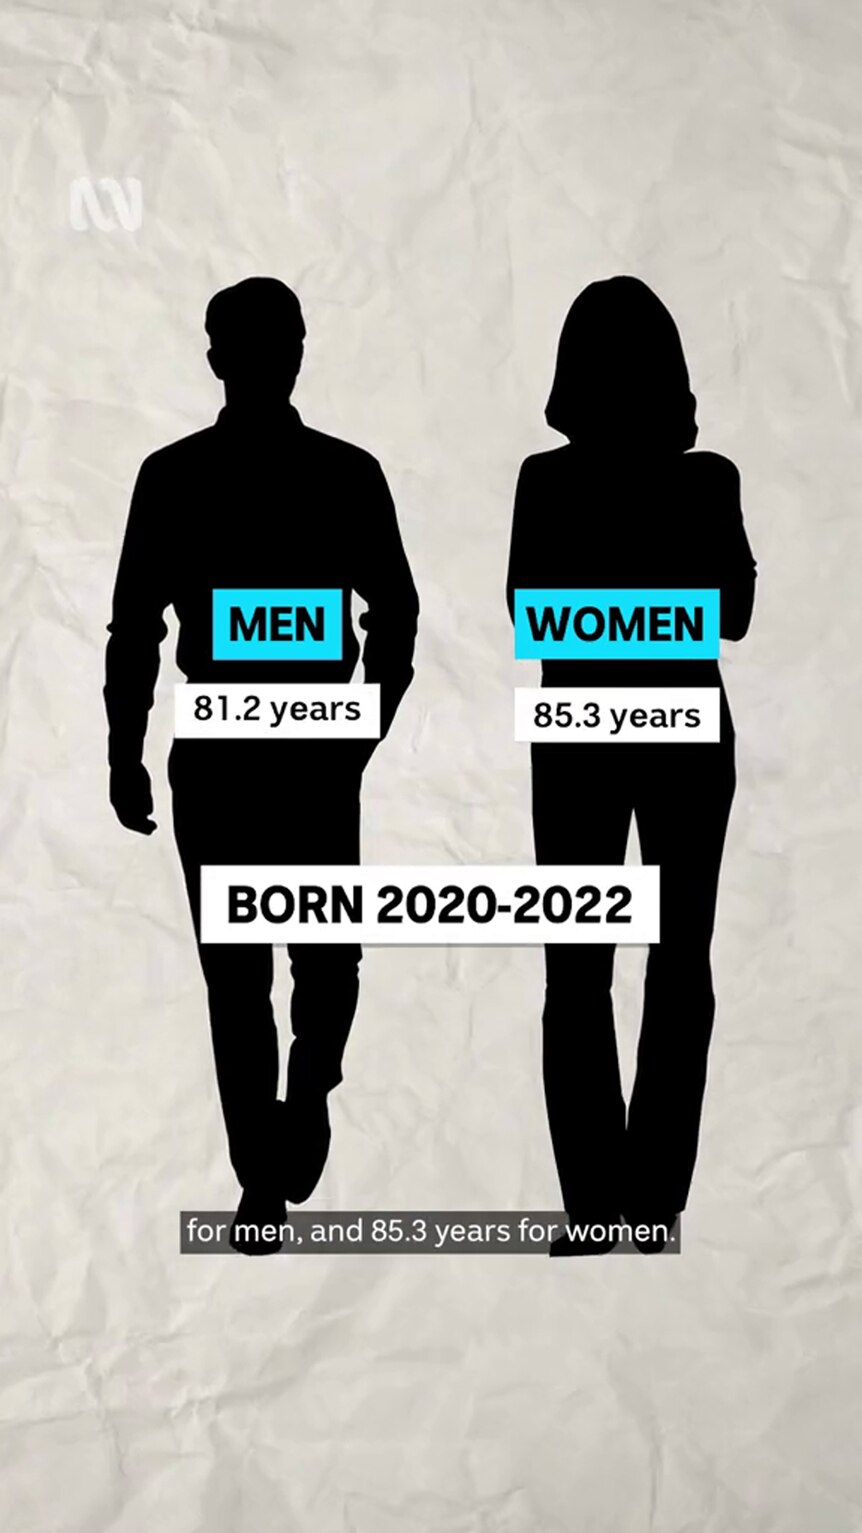 Infographic shows two people's silhouettes: one marked men 81.2 years, the other women 85.3 years